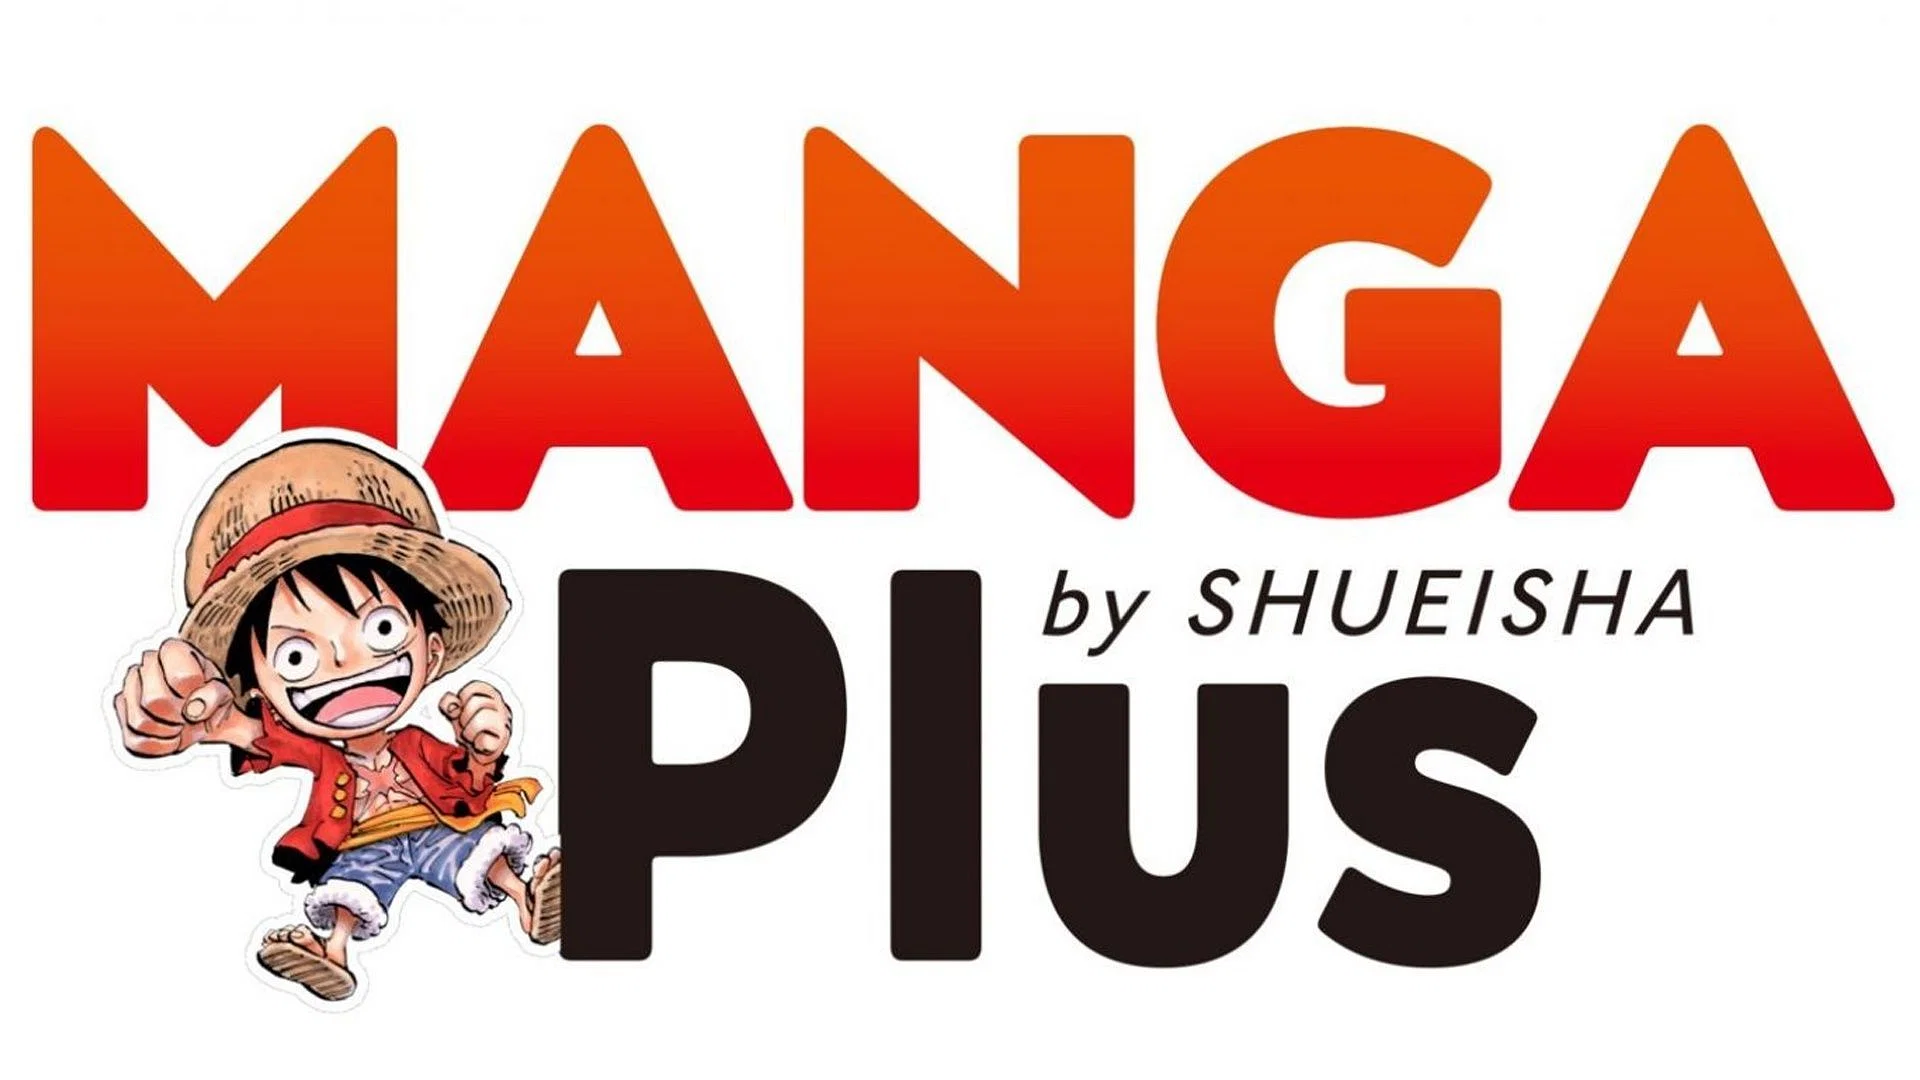 MANGA Plus by SHUEISHA Celebrates 28 Million App Downloads with New Feature To celebrate this significant achievement, MANGA Plus is introducing a new limited-time feature that allows users to support their favorite manga creators by watching ads. This feature is available in all nine languages supported on the app and can be accessed by users worldwide. New Feature: Watch Ads to Support Manga Creators Starting from June 3rd, 12 pm (JST), or 3 am (GMT), users will have the option to watch an advertisement after reading a chapter on the MANGA Plus app. A portion of the ad revenue generated will be directly distributed to the respective manga creators. This initiative aims to highlight and support the manga creators who pour their hearts and souls into their work. It also provides overseas readers with a direct way to show their support and bridges the gap between them and the manga creators. This initiative is possible because MANGA Plus is a service run directly by the editorial team in Japan. How It Works: Read a Chapter: Read a chapter on the MANGA Plus app as usual. Watch an Ad: At the end of the chapter, there will be a prompt to watch an ad. Support Creators: A portion of the ad revenue goes directly to the manga creator. Continue Reading: Read more from the same creator, or find a new title and manga creator to support. A Message from Deputy Editor-In-Chief Momiyama: “We are thrilled to have reached 28 million downloads and are incredibly grateful to our dedicated user base,” said Deputy Editor-In-Chief Momiyama. “Manga creators put their everything into creating manga with the help of editors. However, it’s only because of the fans that we can continuously create new stories. With this new feature, users can watch an ad to support their favorite manga creator. We hope that this new feature will allow users to connect more with our platform, and have their voices heard by the manga creators and editors in Japan.” About MANGA Plus by SHUEISHA: MANGA Plus by SHUEISHA is operated directly by the editorial department in Japan, ensuring that what you read directly supports the creators. The platform hopes to reach many fans and help readers discover their new favorite manga to read. This new feature not only celebrates the app's success but also strengthens the connection between manga fans and creators, offering a simple yet impactful way for readers to contribute to the manga industry. Now Give me 3 15 words of summary lines from it and a catching Sub Heading